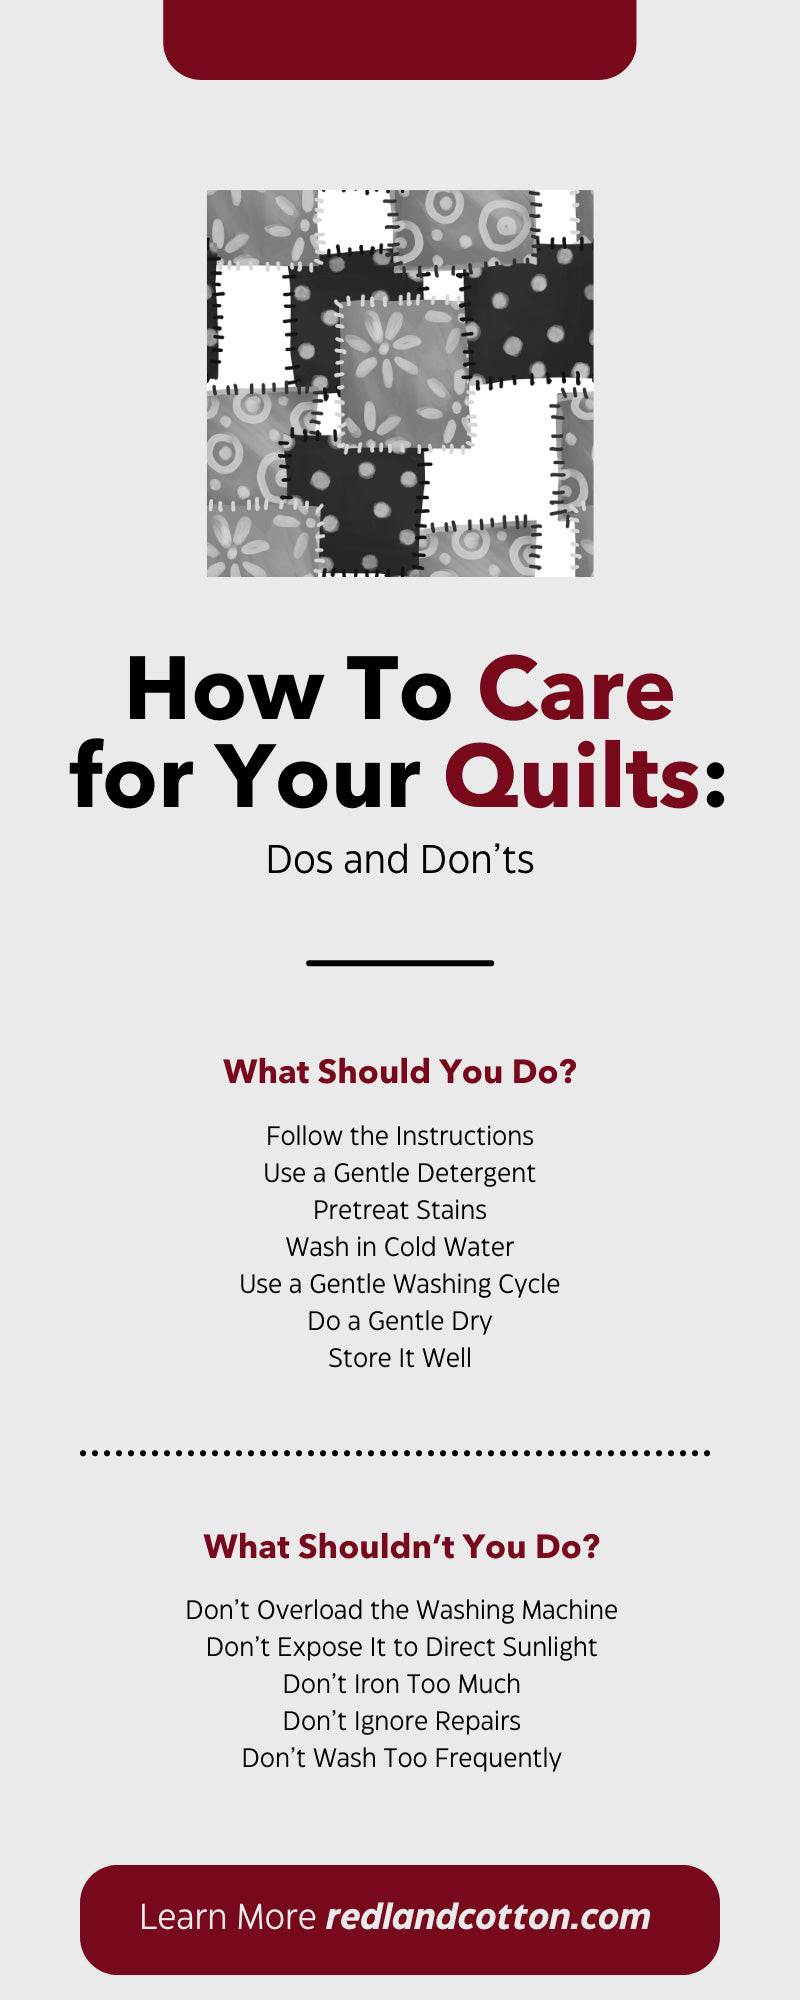 How To Care for Your Quilts: Dos and Don’ts